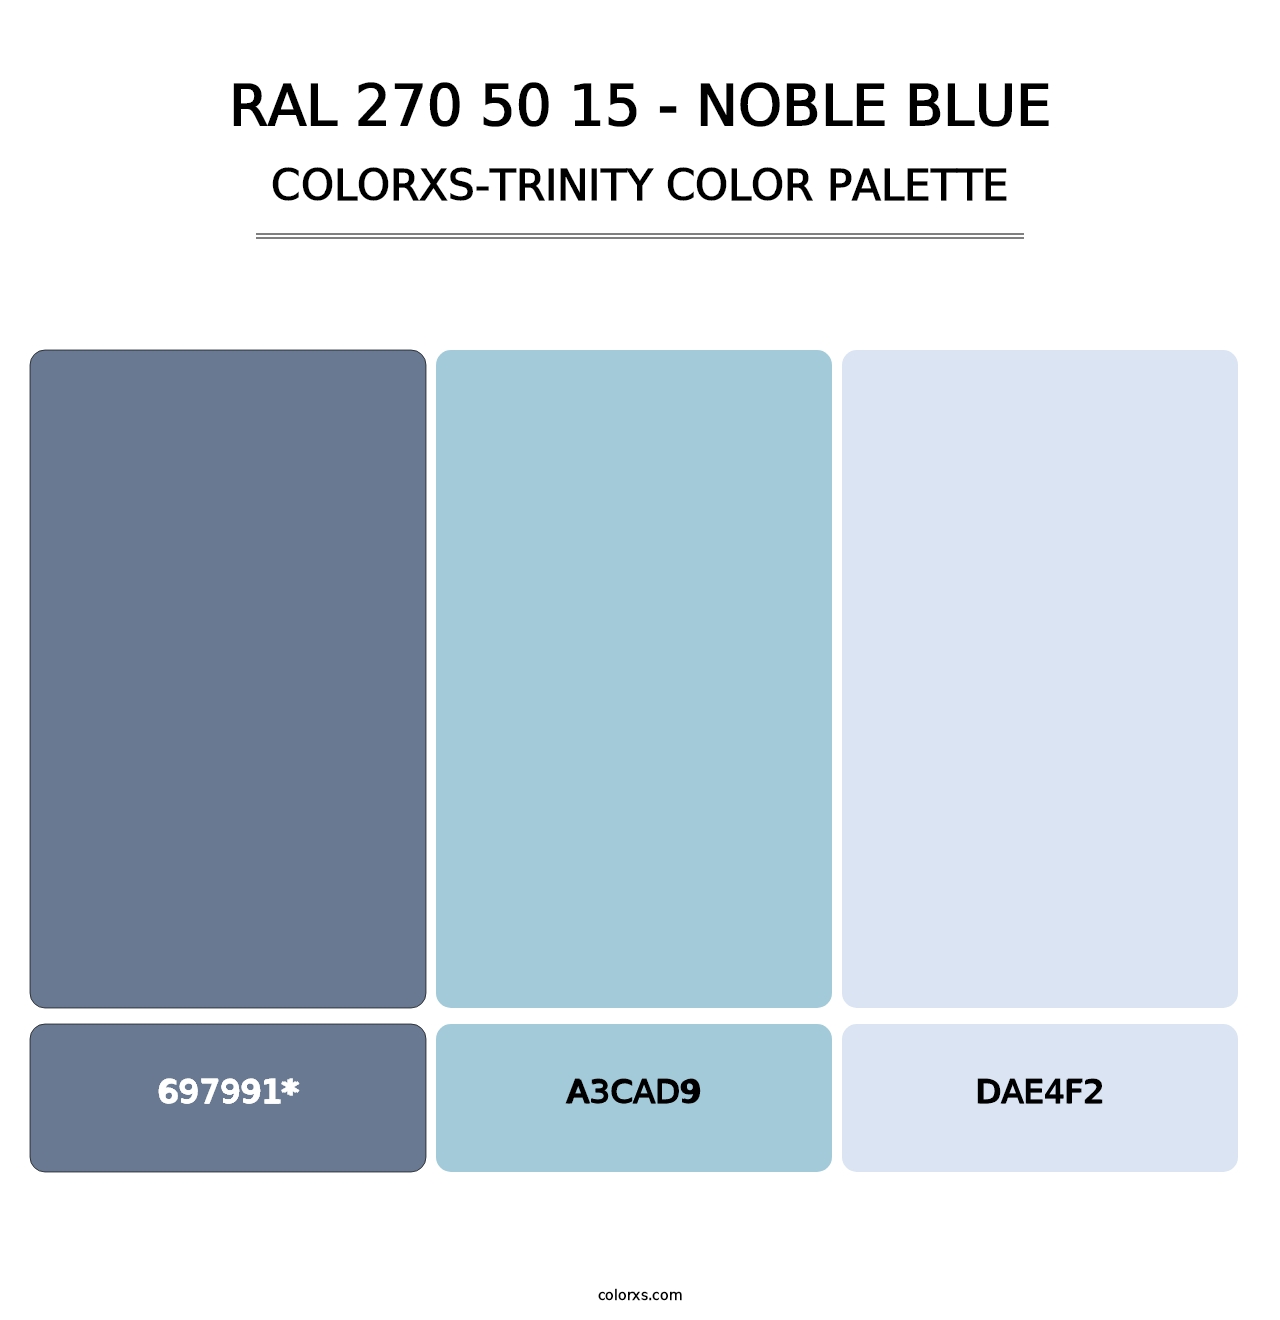 RAL 270 50 15 - Noble Blue - Colorxs Trinity Palette